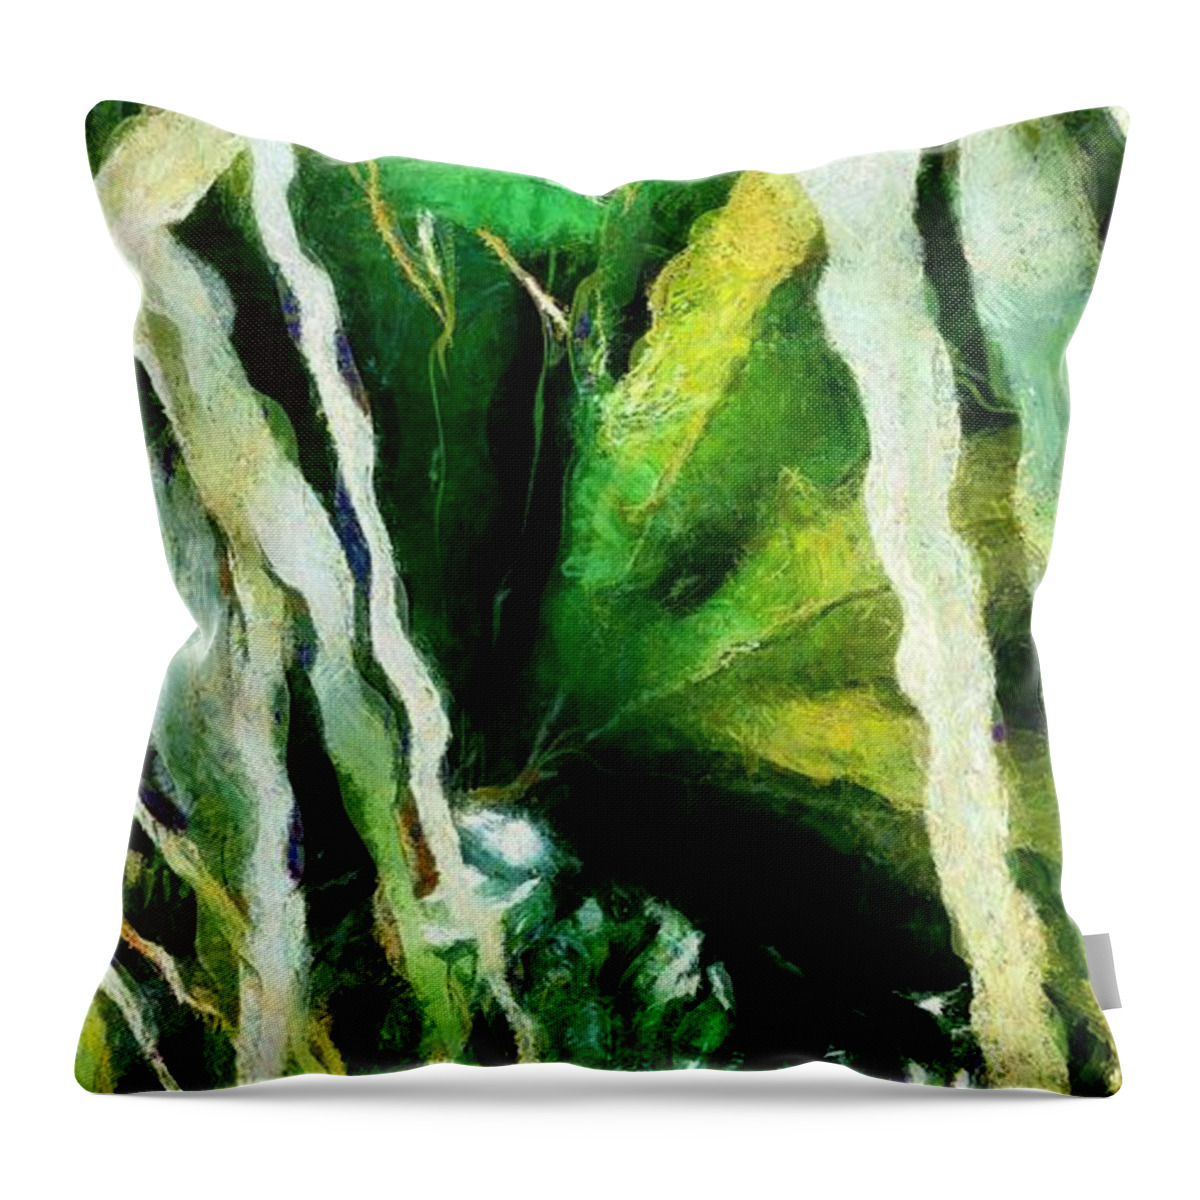 Plant Throw Pillow featuring the painting My Garden by Lelia DeMello